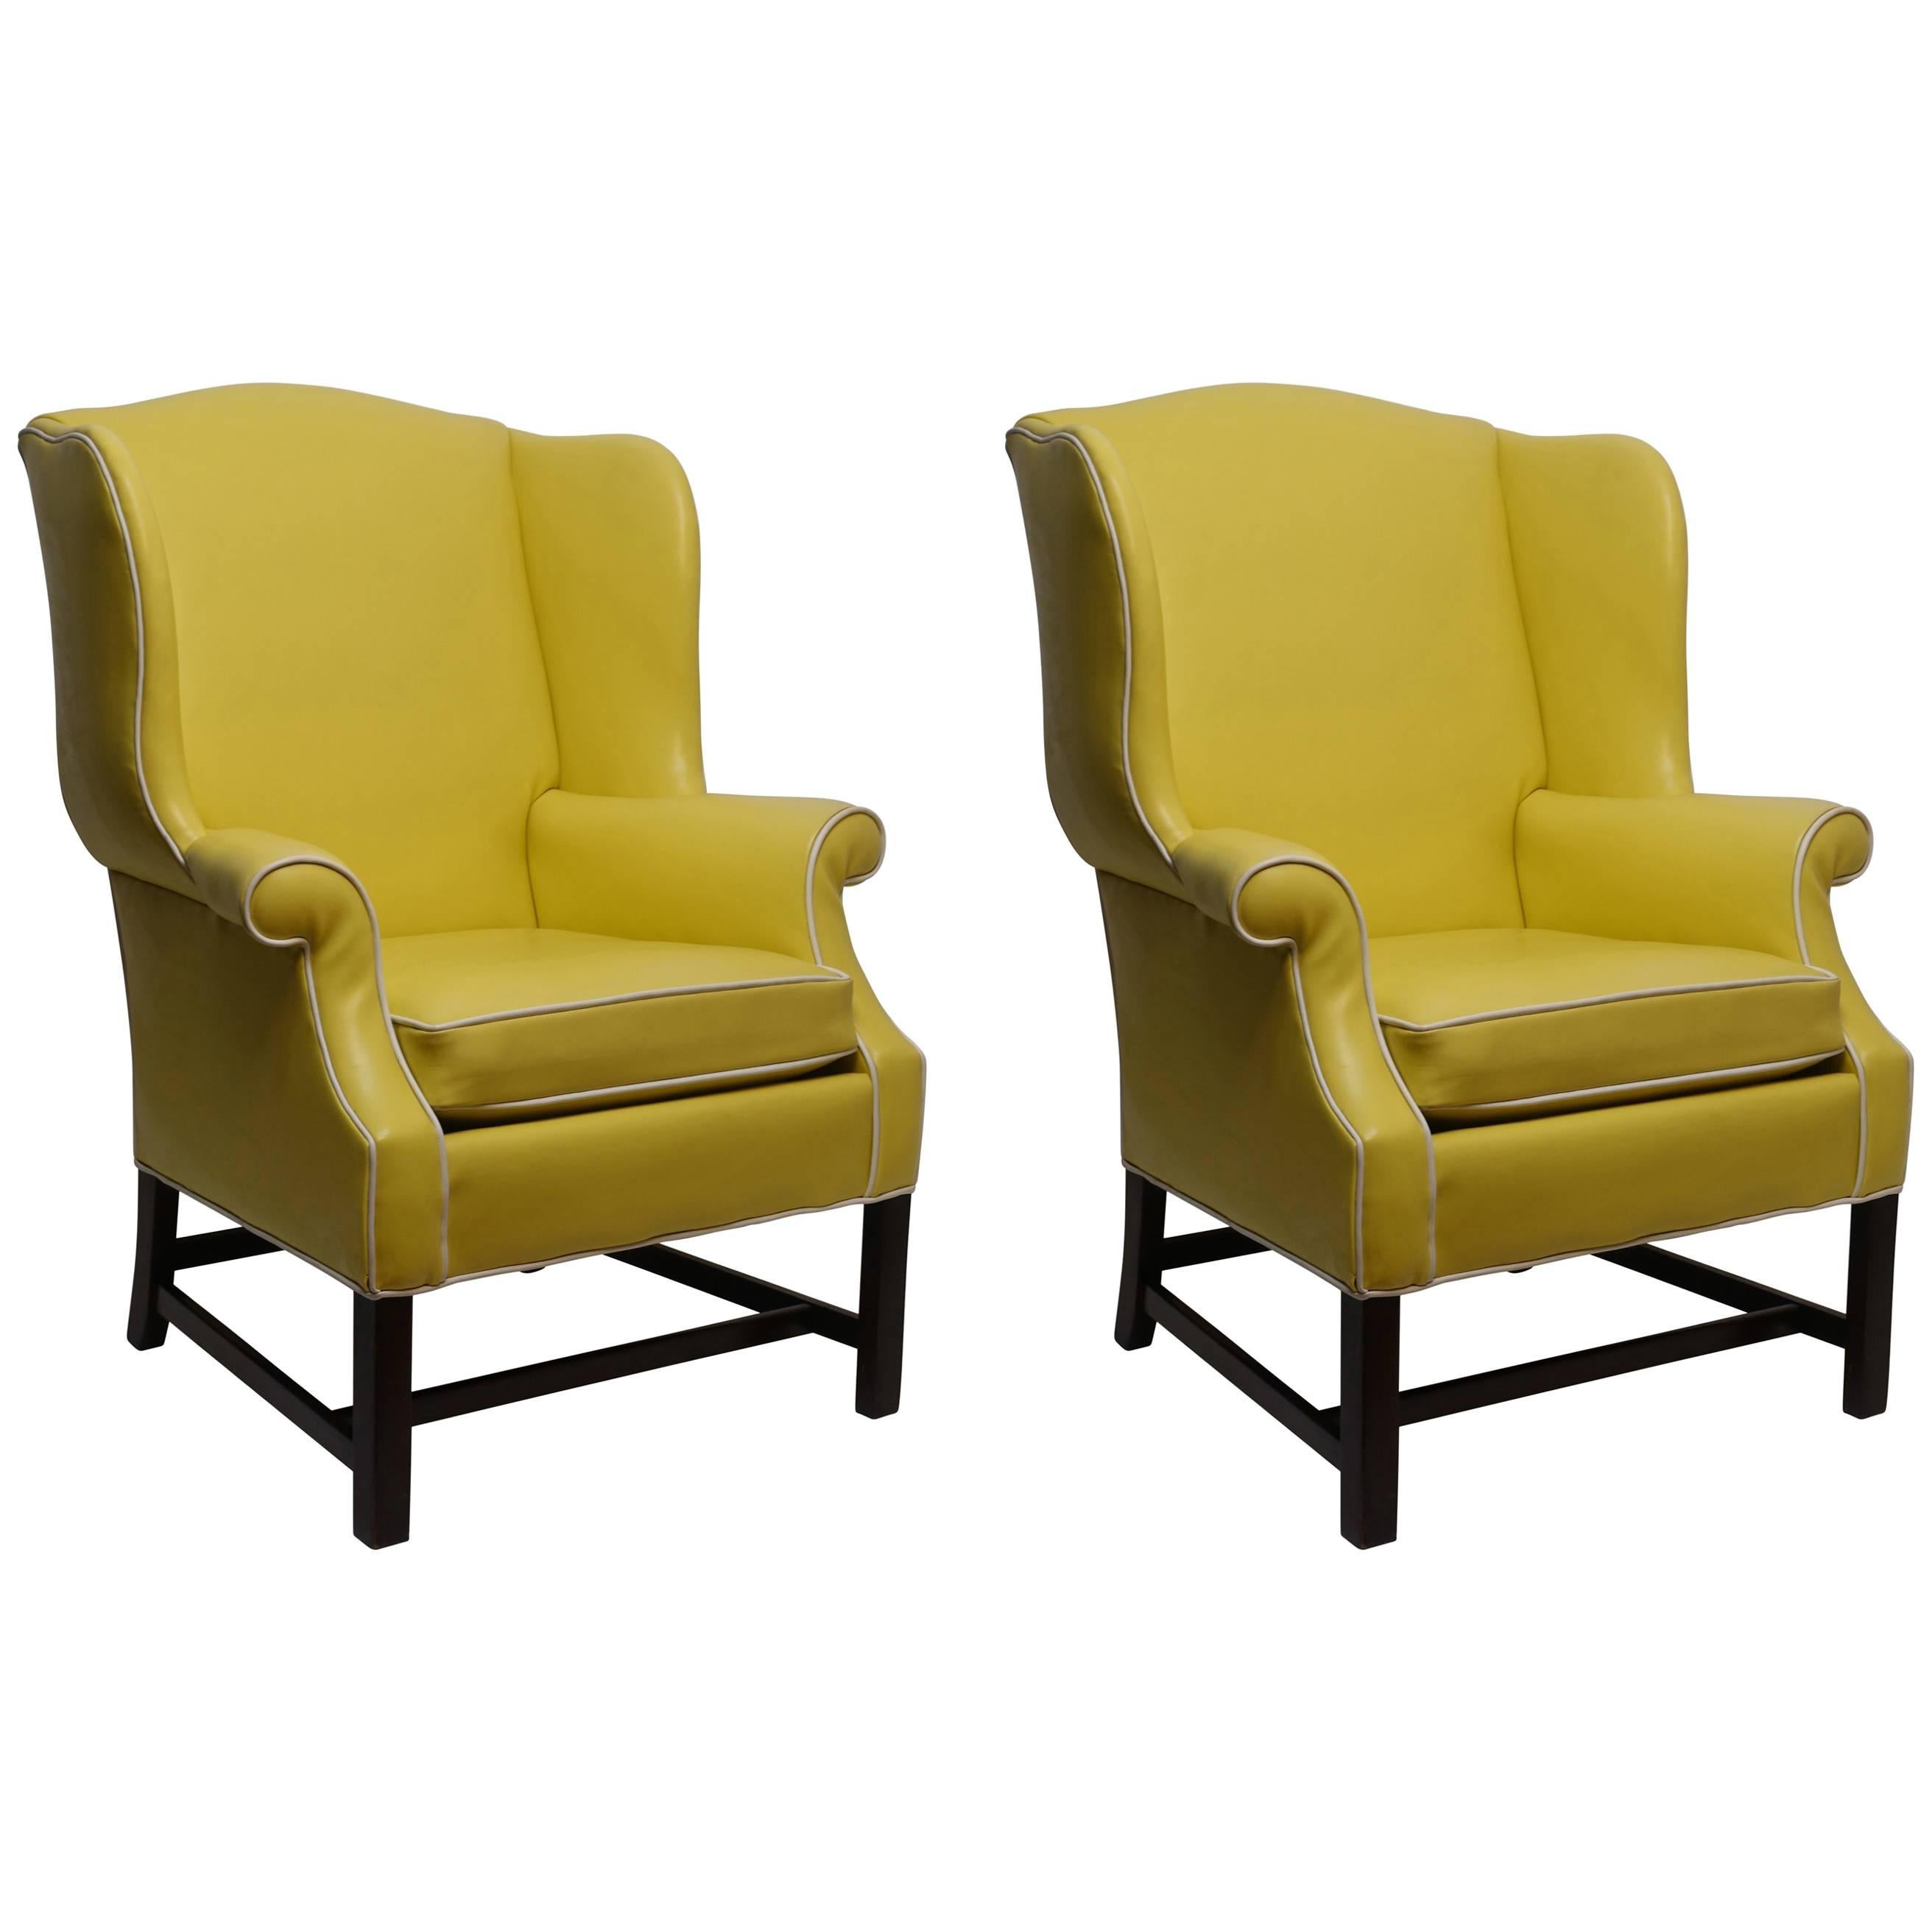 Pair of Georgian Style Yellow Vinyl Wingback Chairs with Piping Detail, 1960s